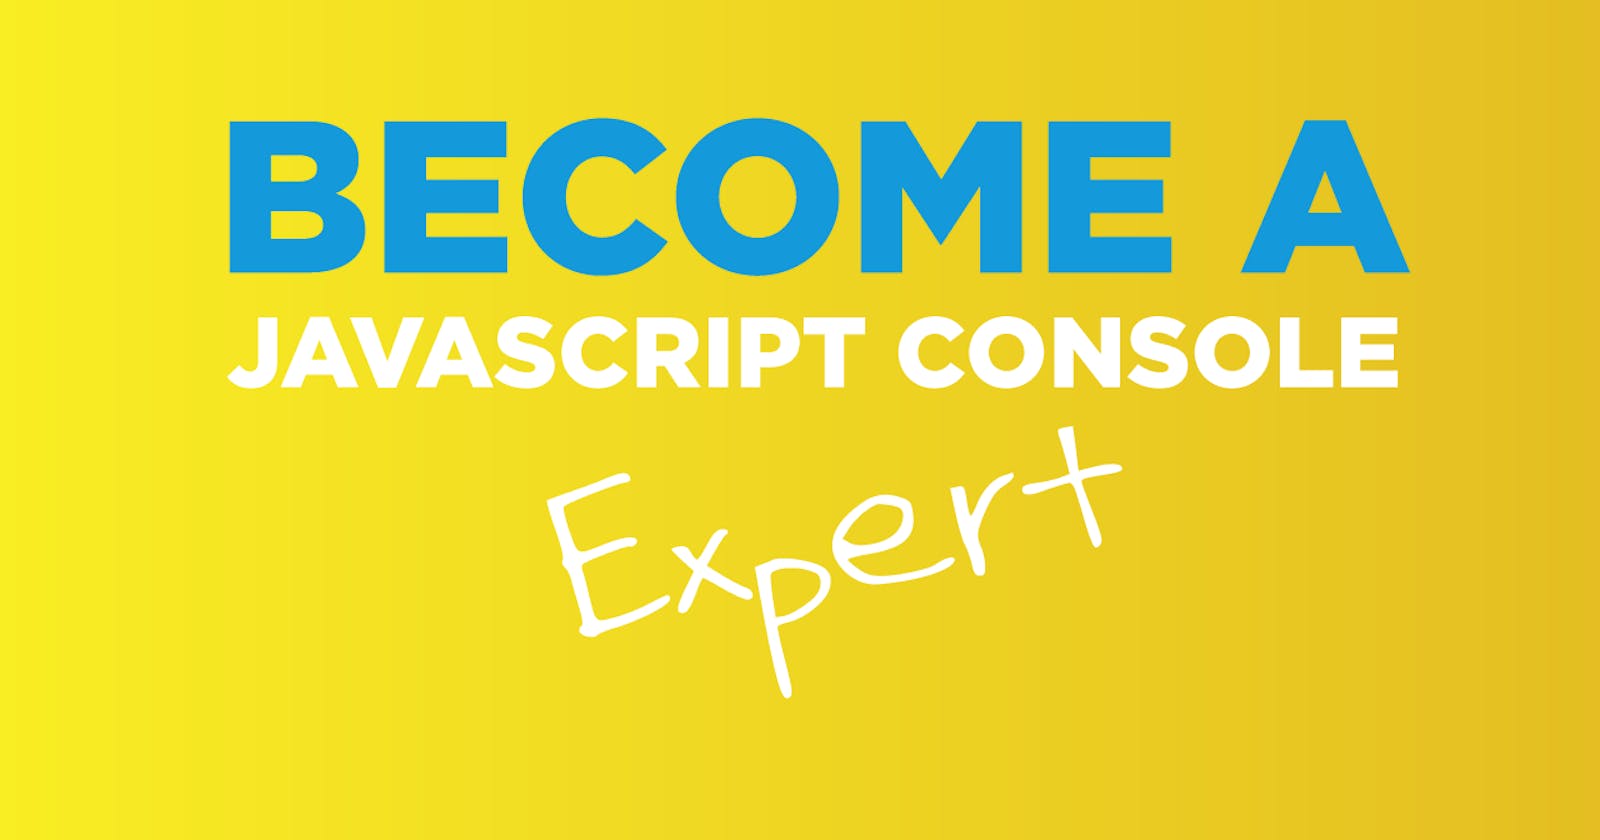 Become A JavaScript Console Expert